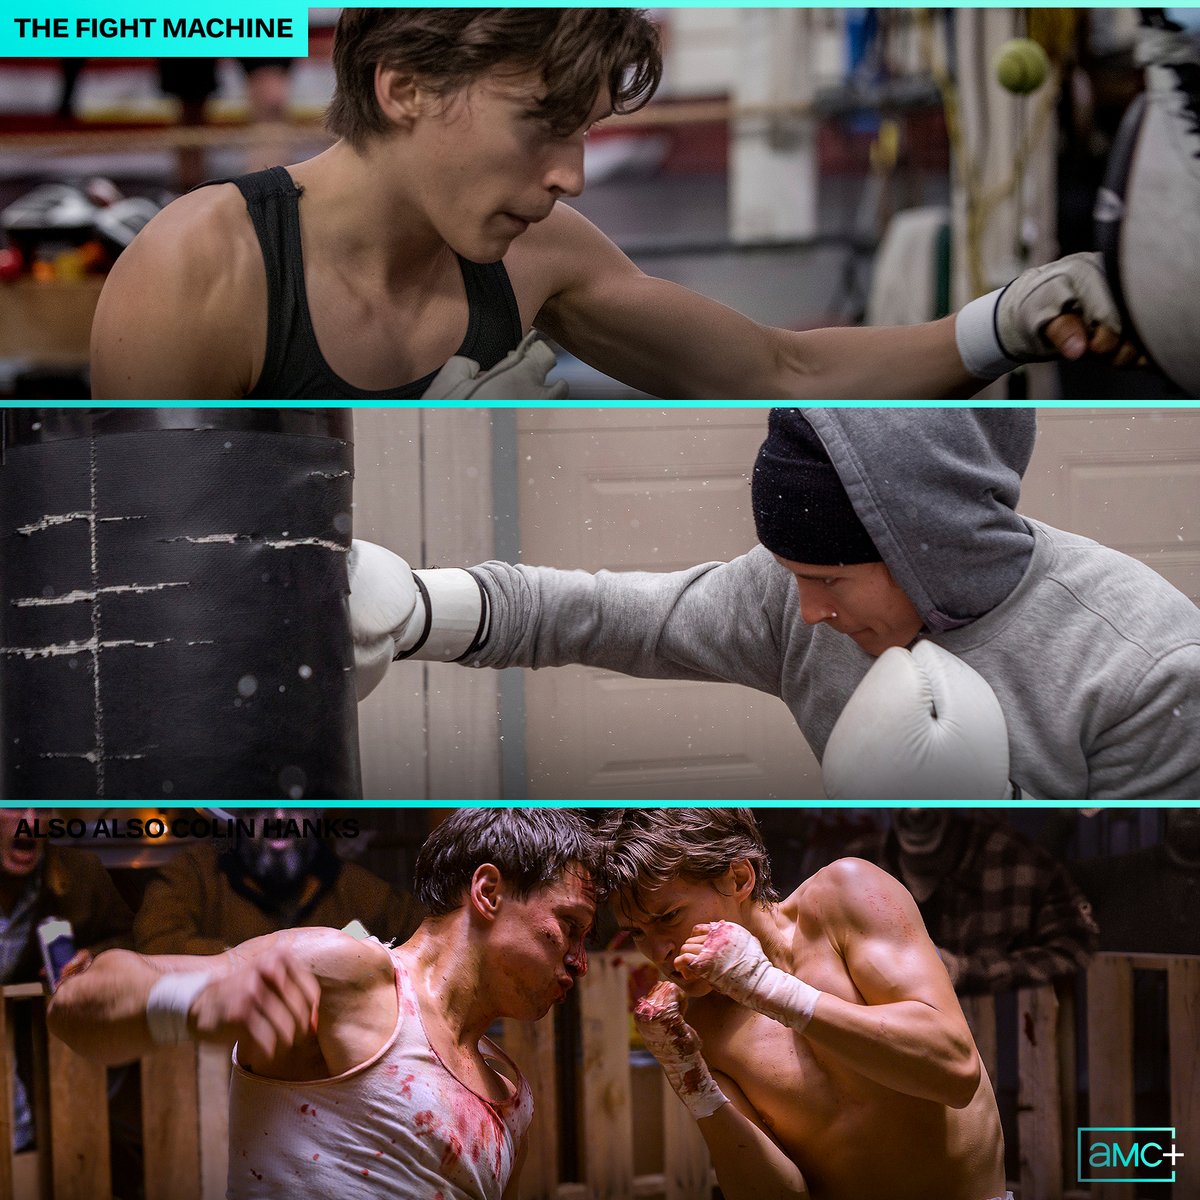 Fighting is an inherent part of destiny, especially if you're a bare-knuckle boxer. 

Stream #TheFightMachine exclusively on AMC+.